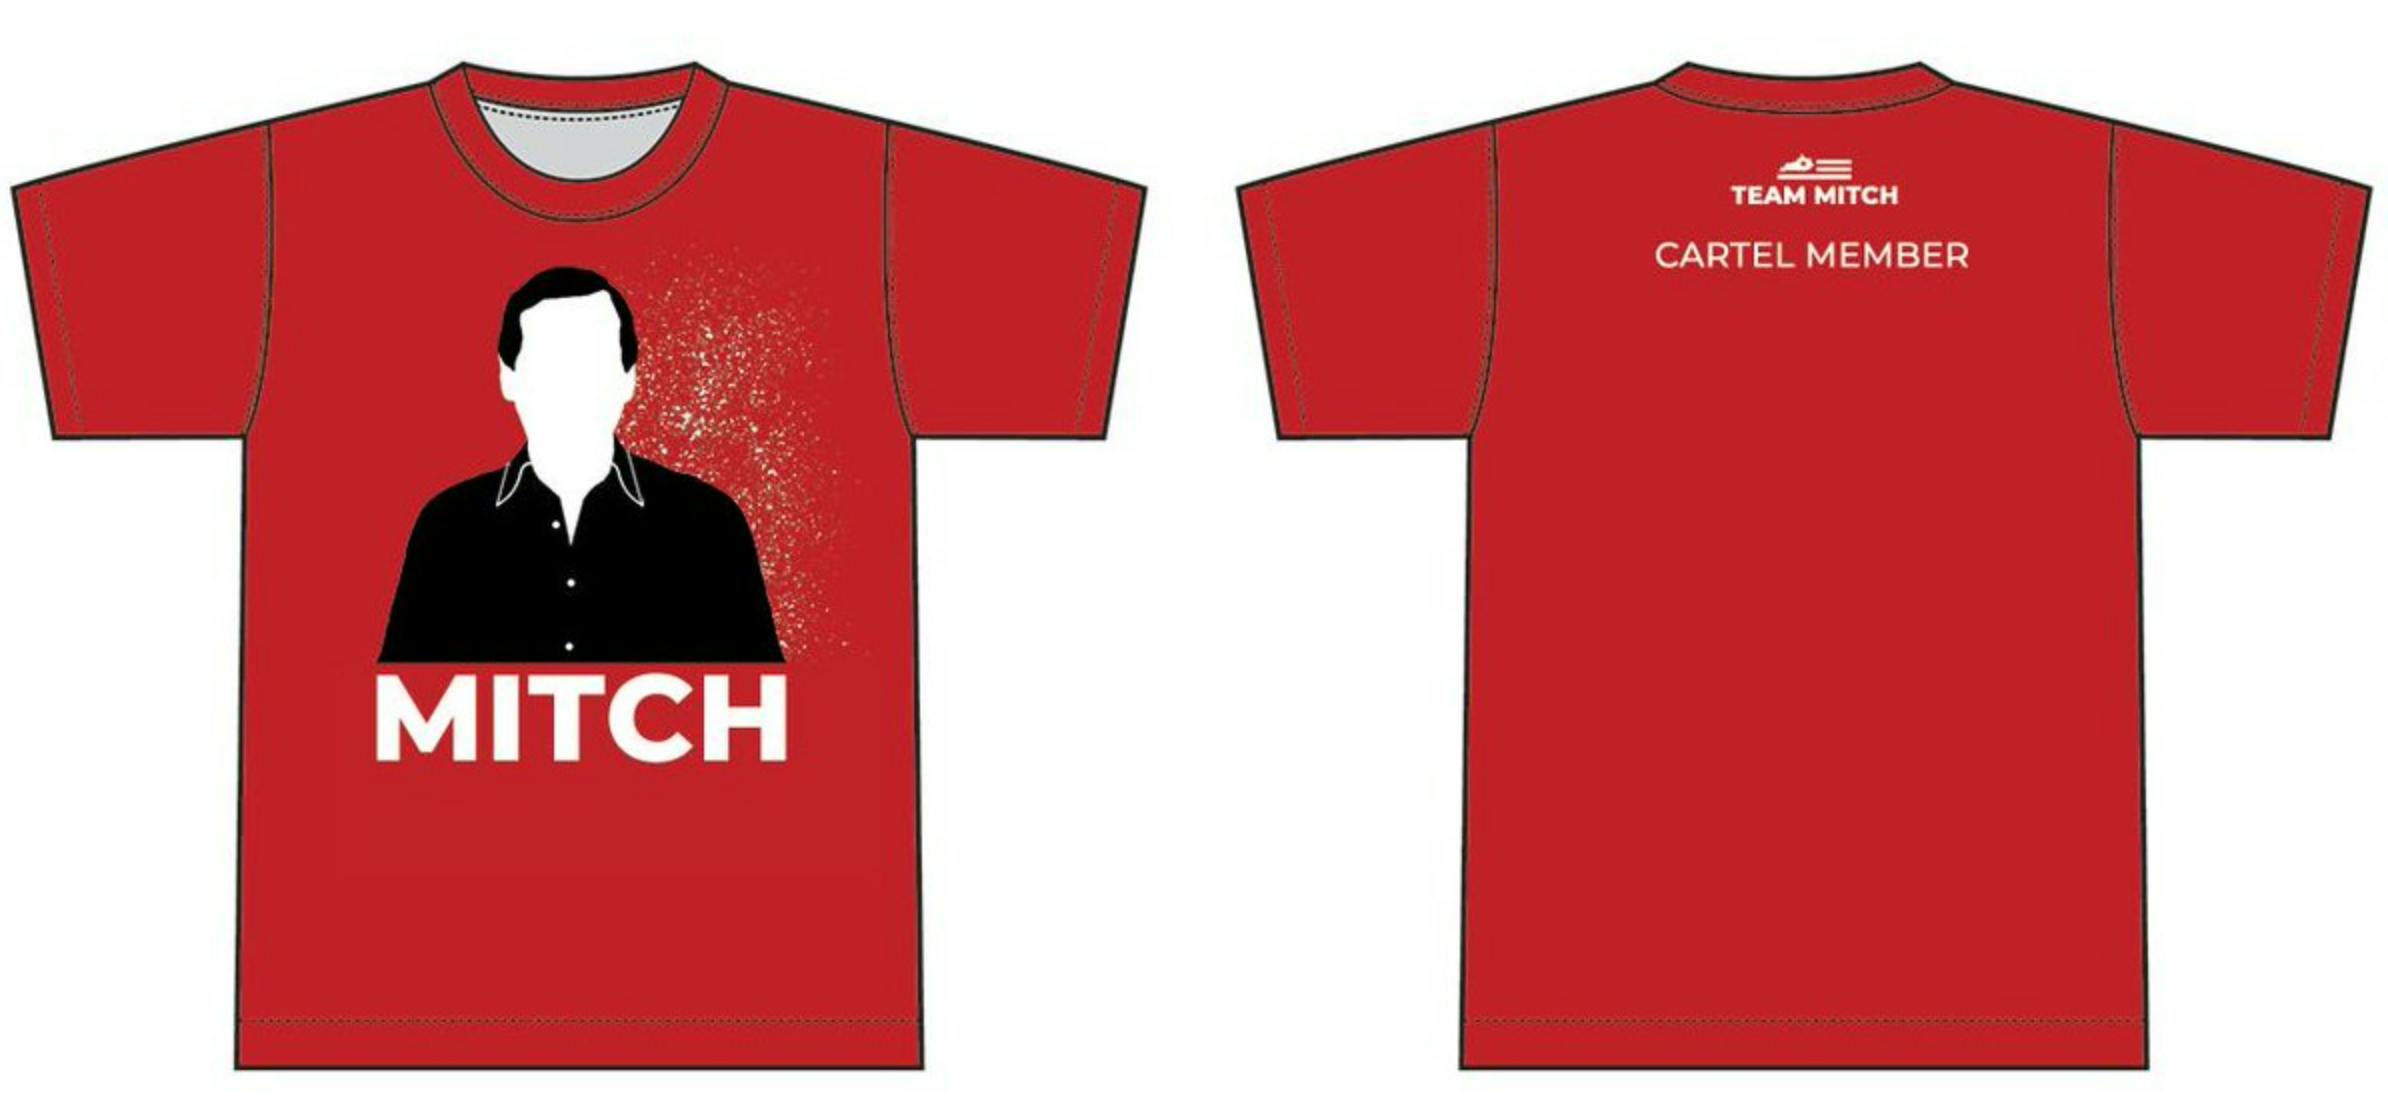 Mitch McConnell Sells Cocaine Mitch-Themed T-Shirts